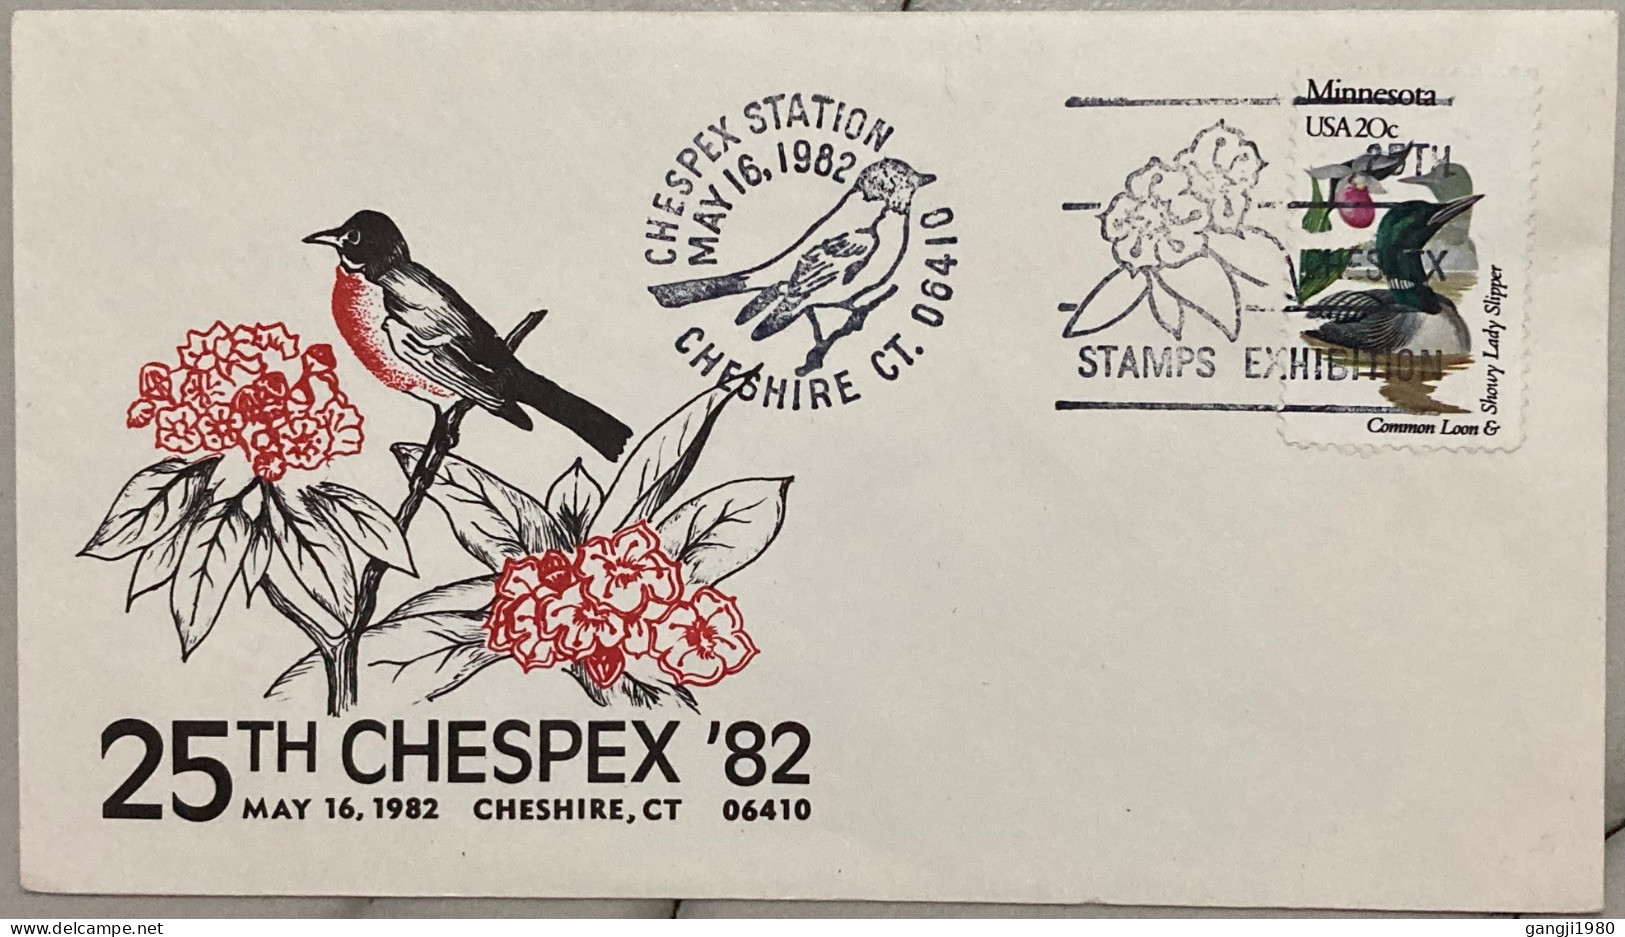 USA 1982, SPECIAL ILLUSTRATED, BIRD COVER, CHESPEX 1982, CHESHIRE CITY. FLOWER PLANT & BIRD PICTURE CANCEL - Oblitérations & Flammes